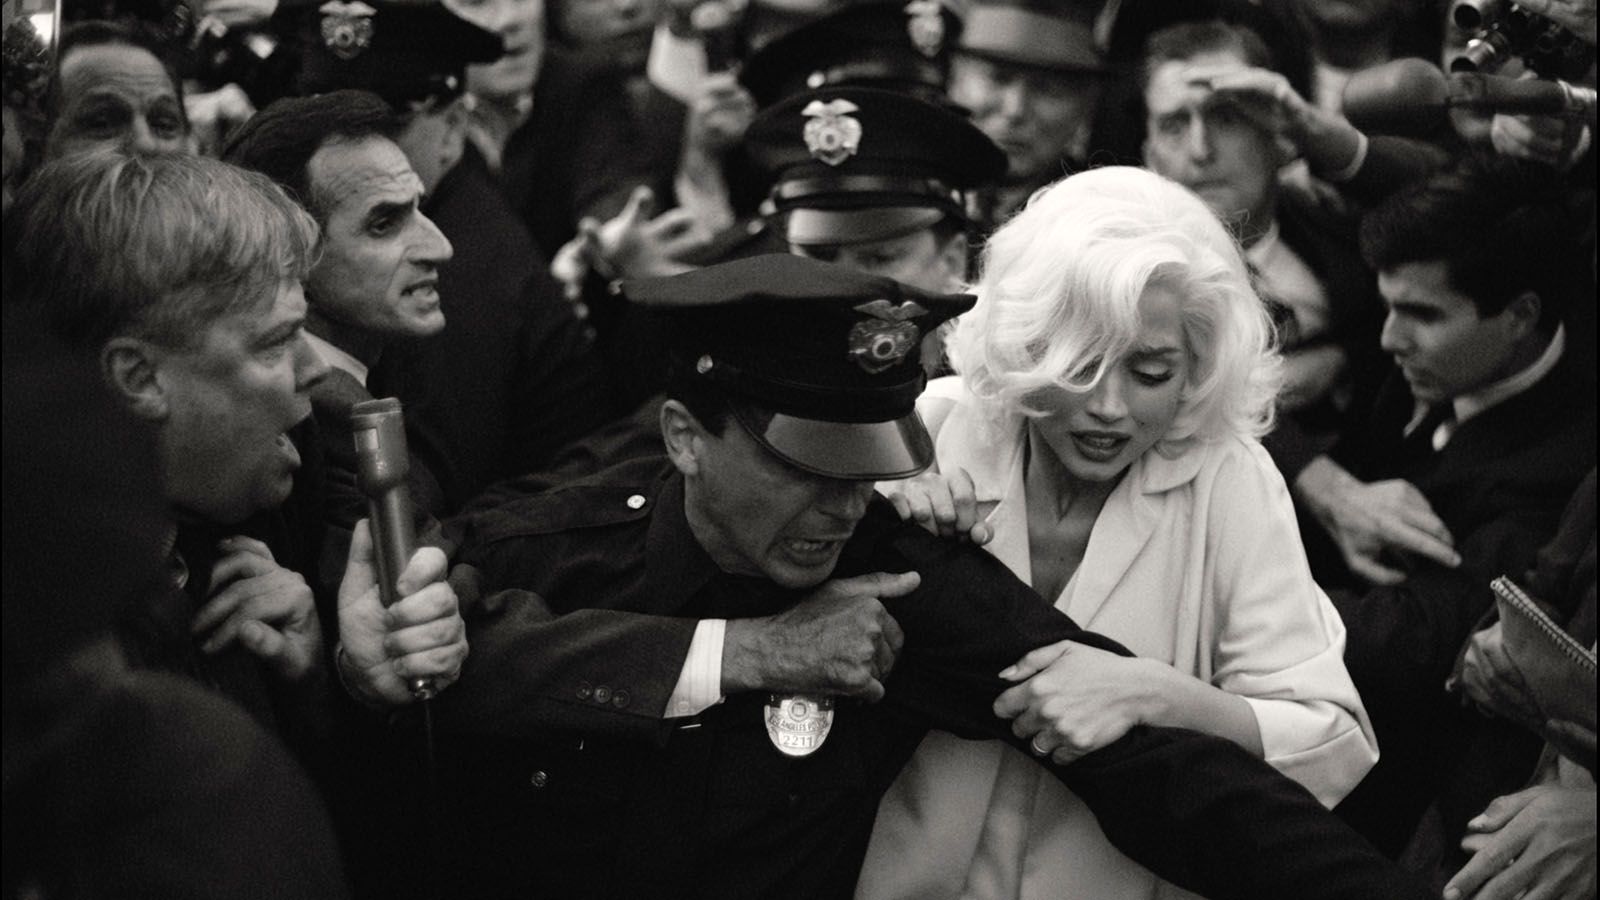 "Blonde" has drawn criticism for its portrayal of Marilyn Monroe.